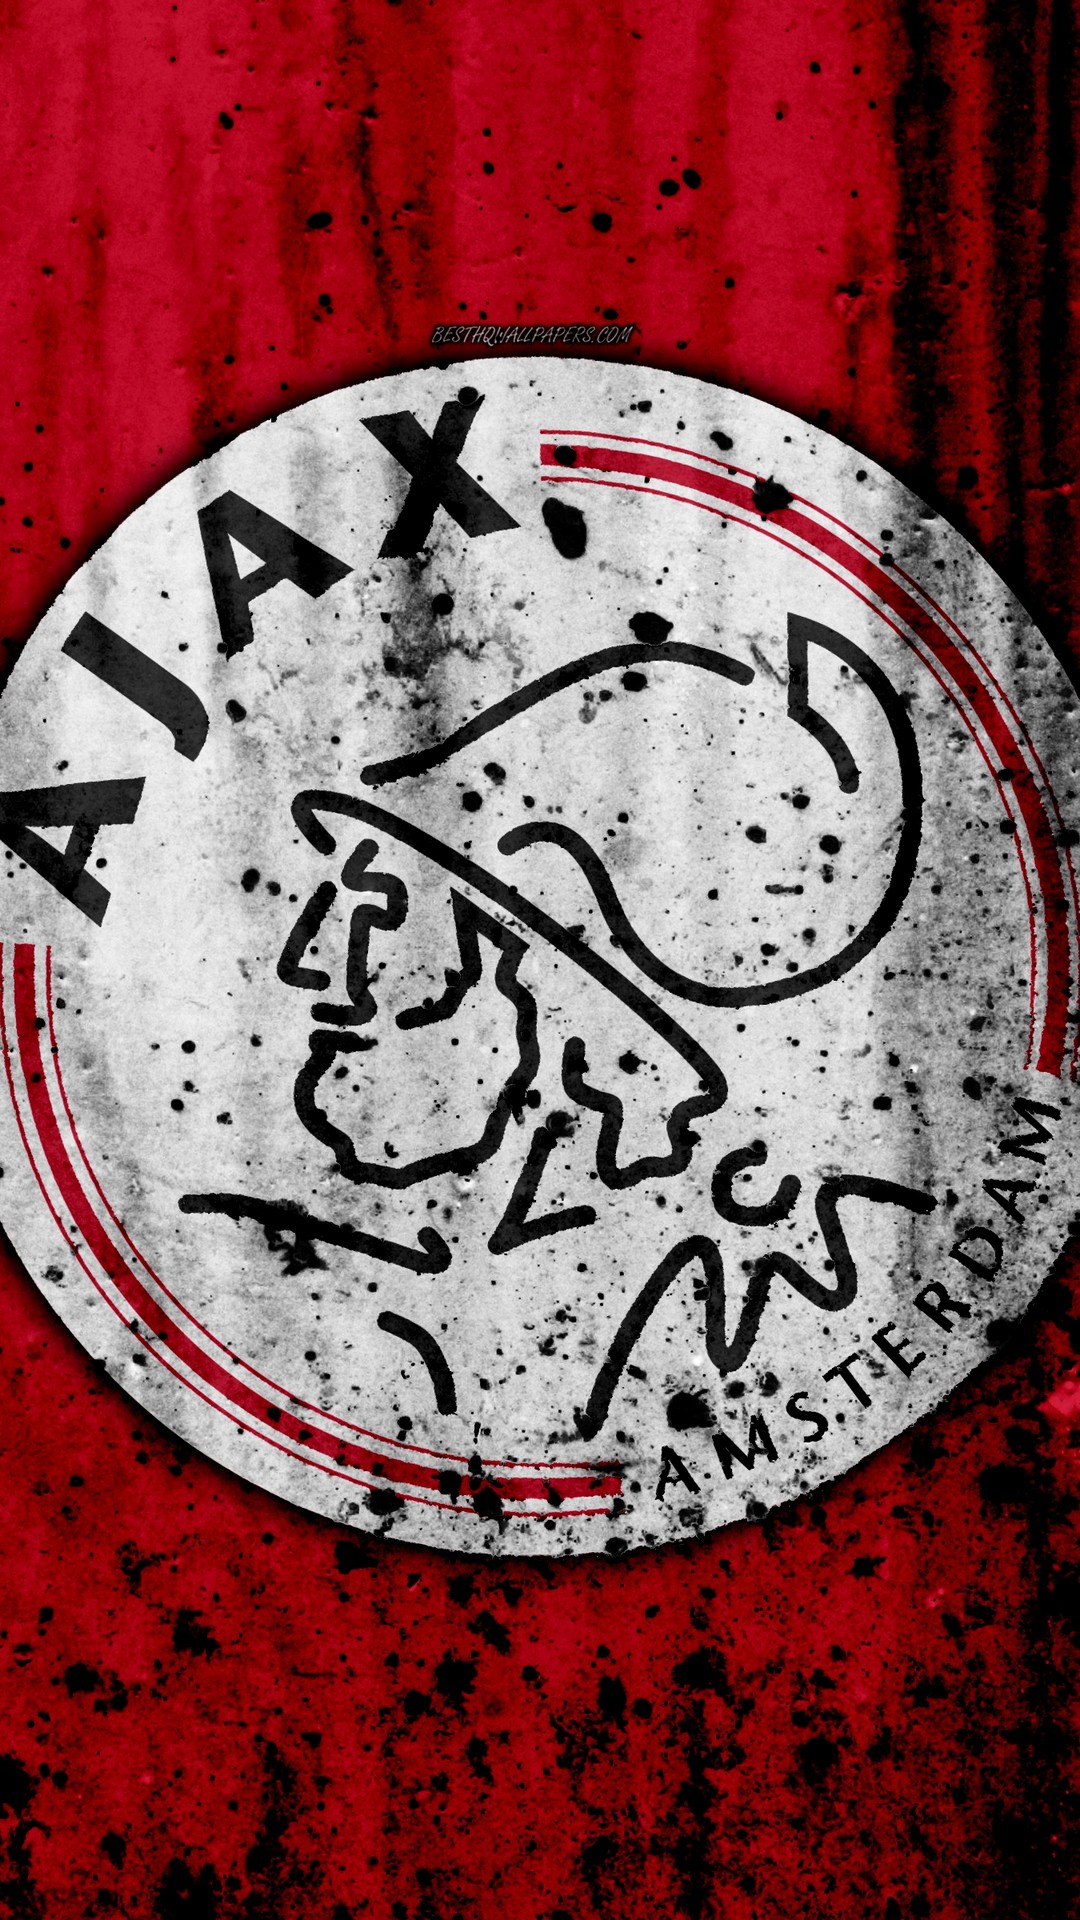 iPhone Wallpaper Ajax with high-resolution 1080x1920 pixel. You can use this wallpaper for your iPhone 5, 6, 7, 8, X, XS, XR backgrounds, Mobile Screensaver, or iPad Lock Screen